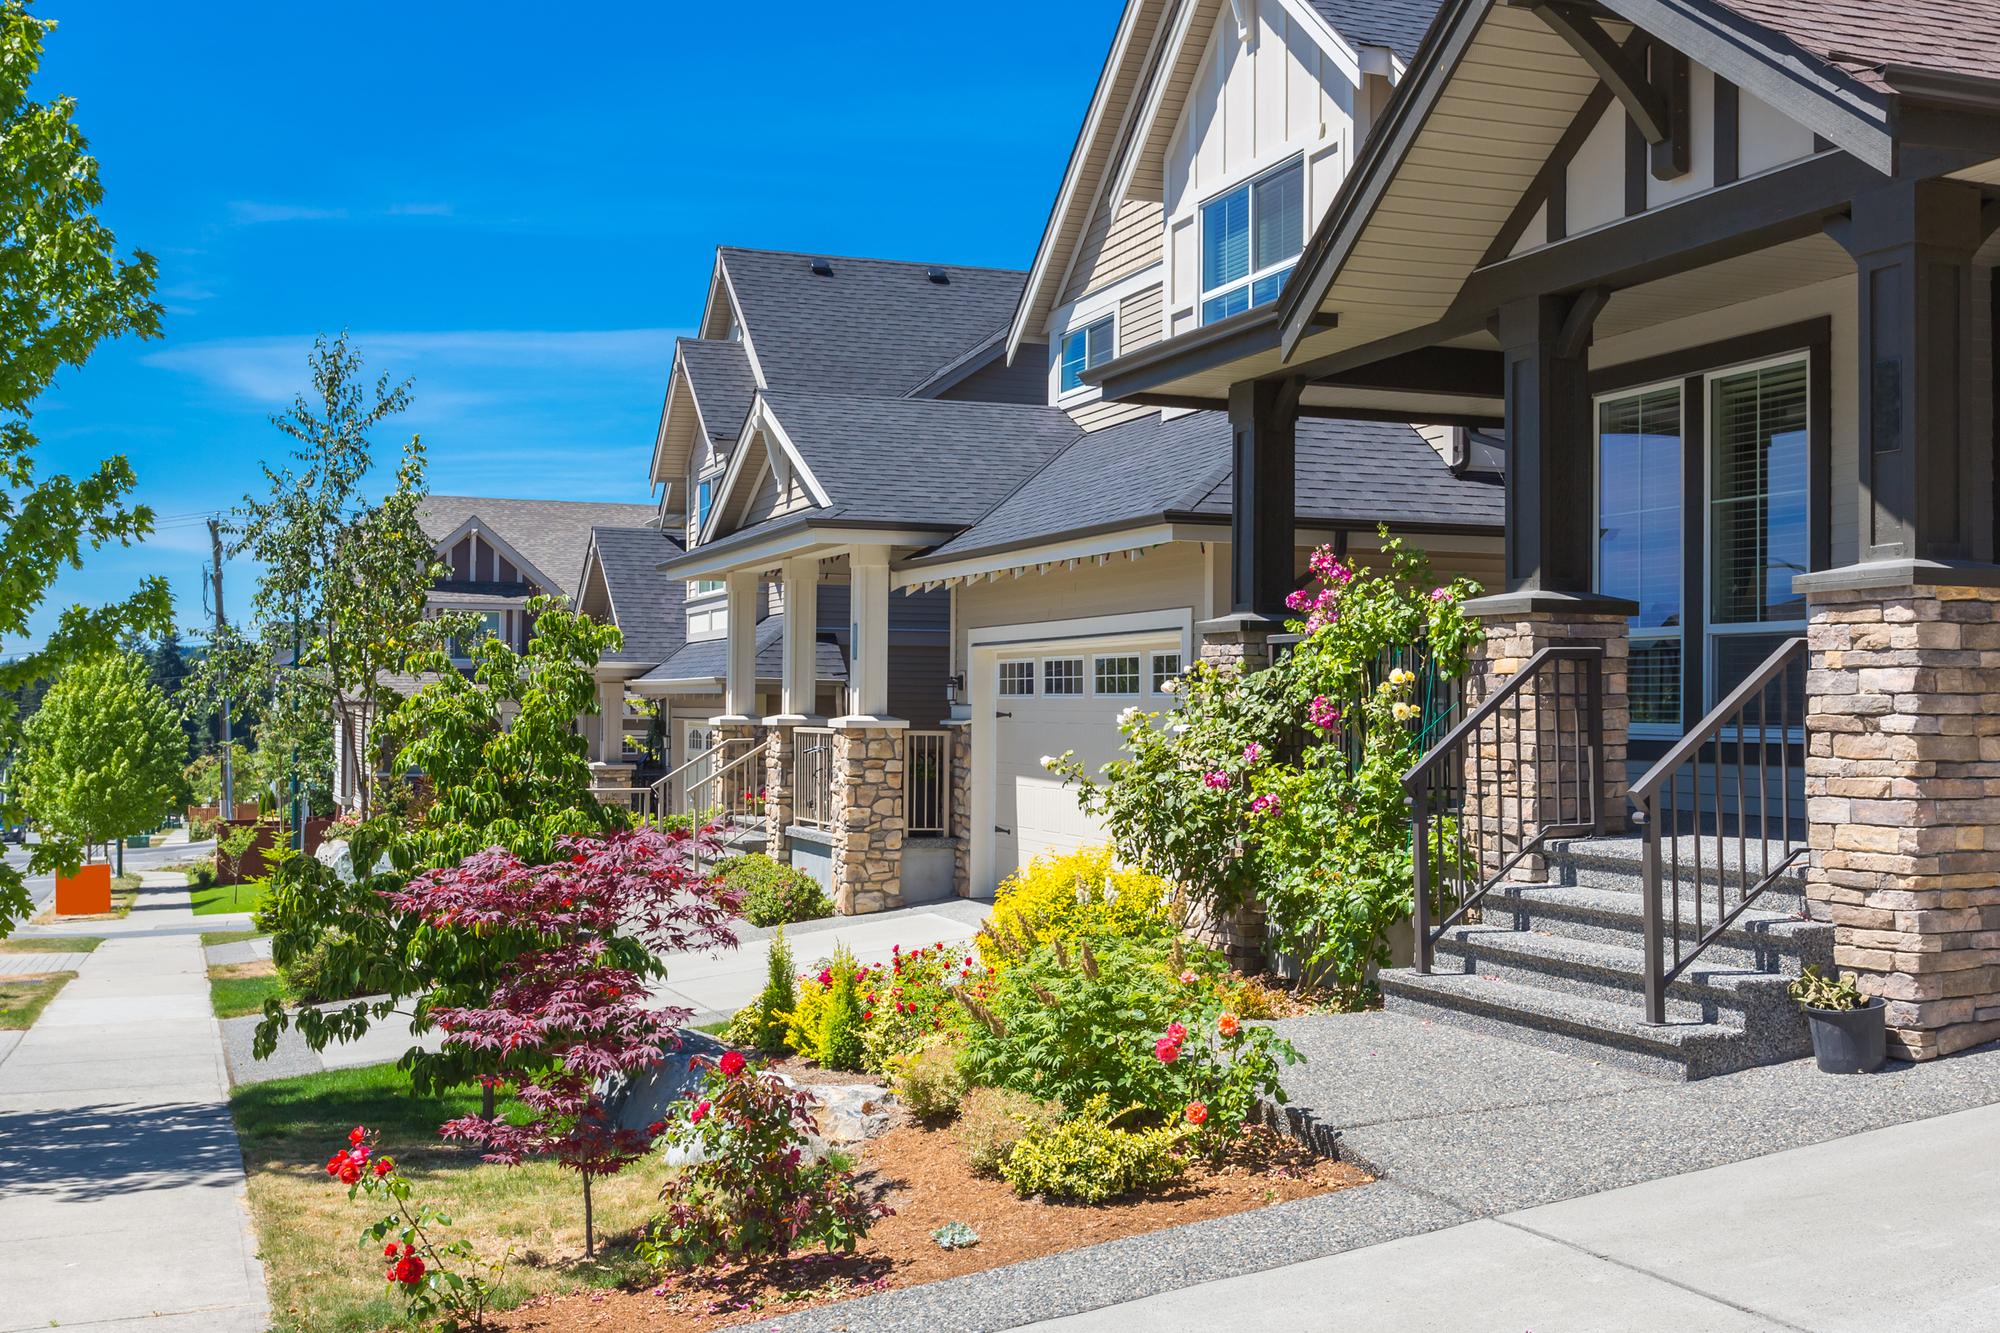 Custom-Built Luxury Homes with Landscaped Front Yards